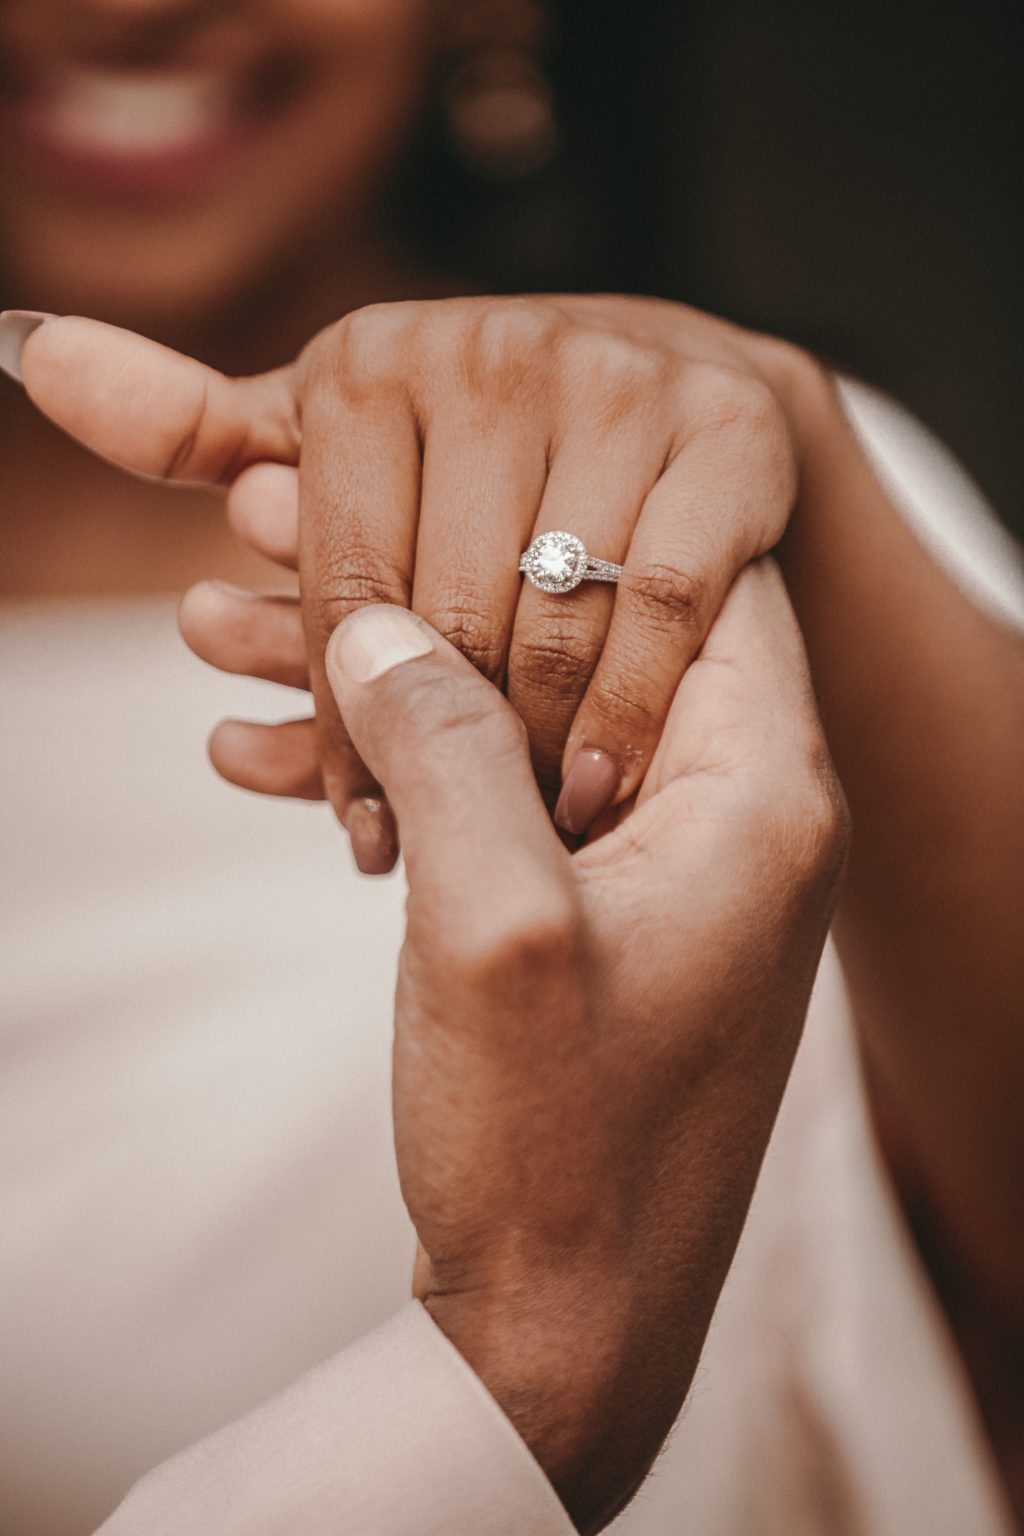 How to Get the Best Diamond Engagement Ring for Your Money